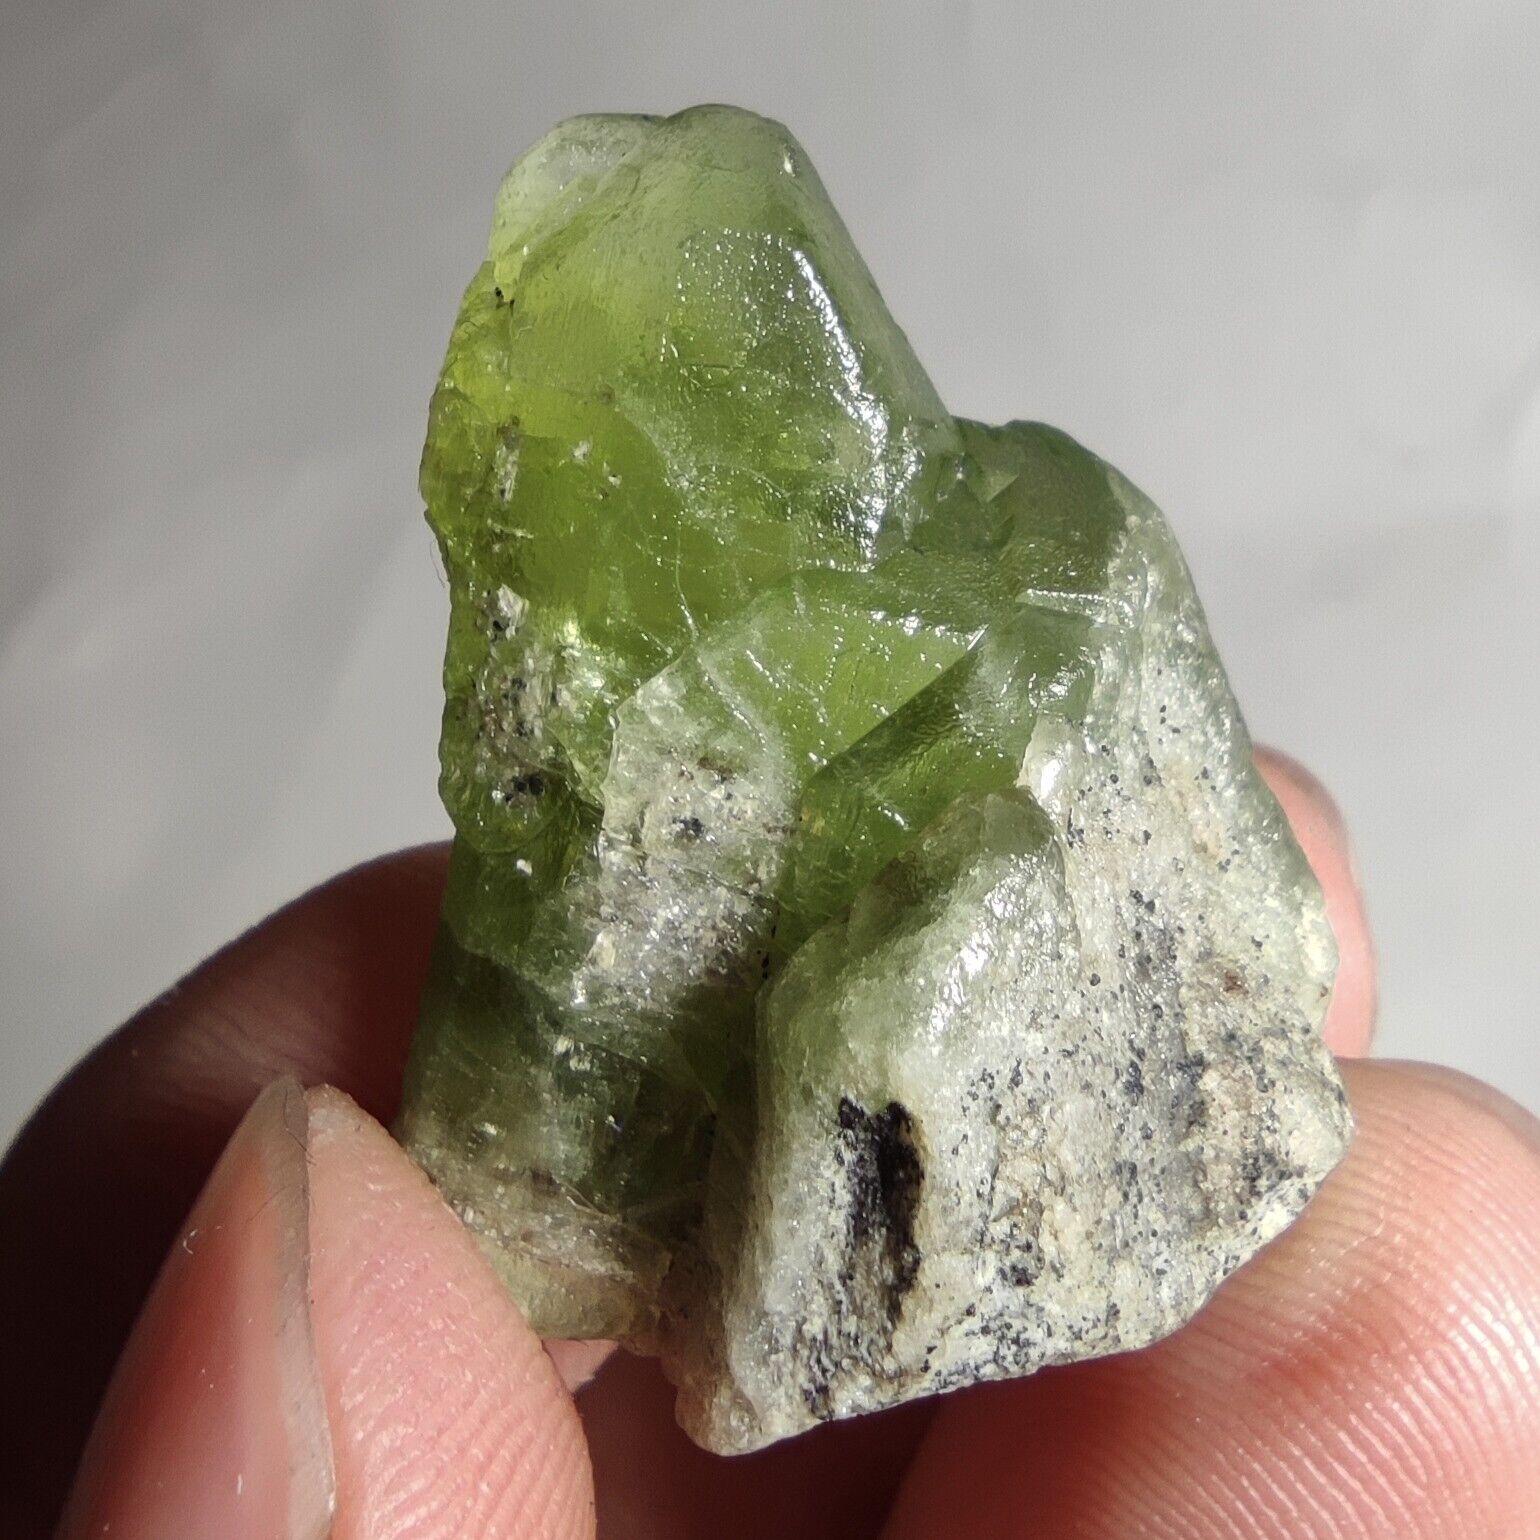 Natural Gemmy Terminated Green Peridot Crystal With Ludwigite Inclusion, 13.9g